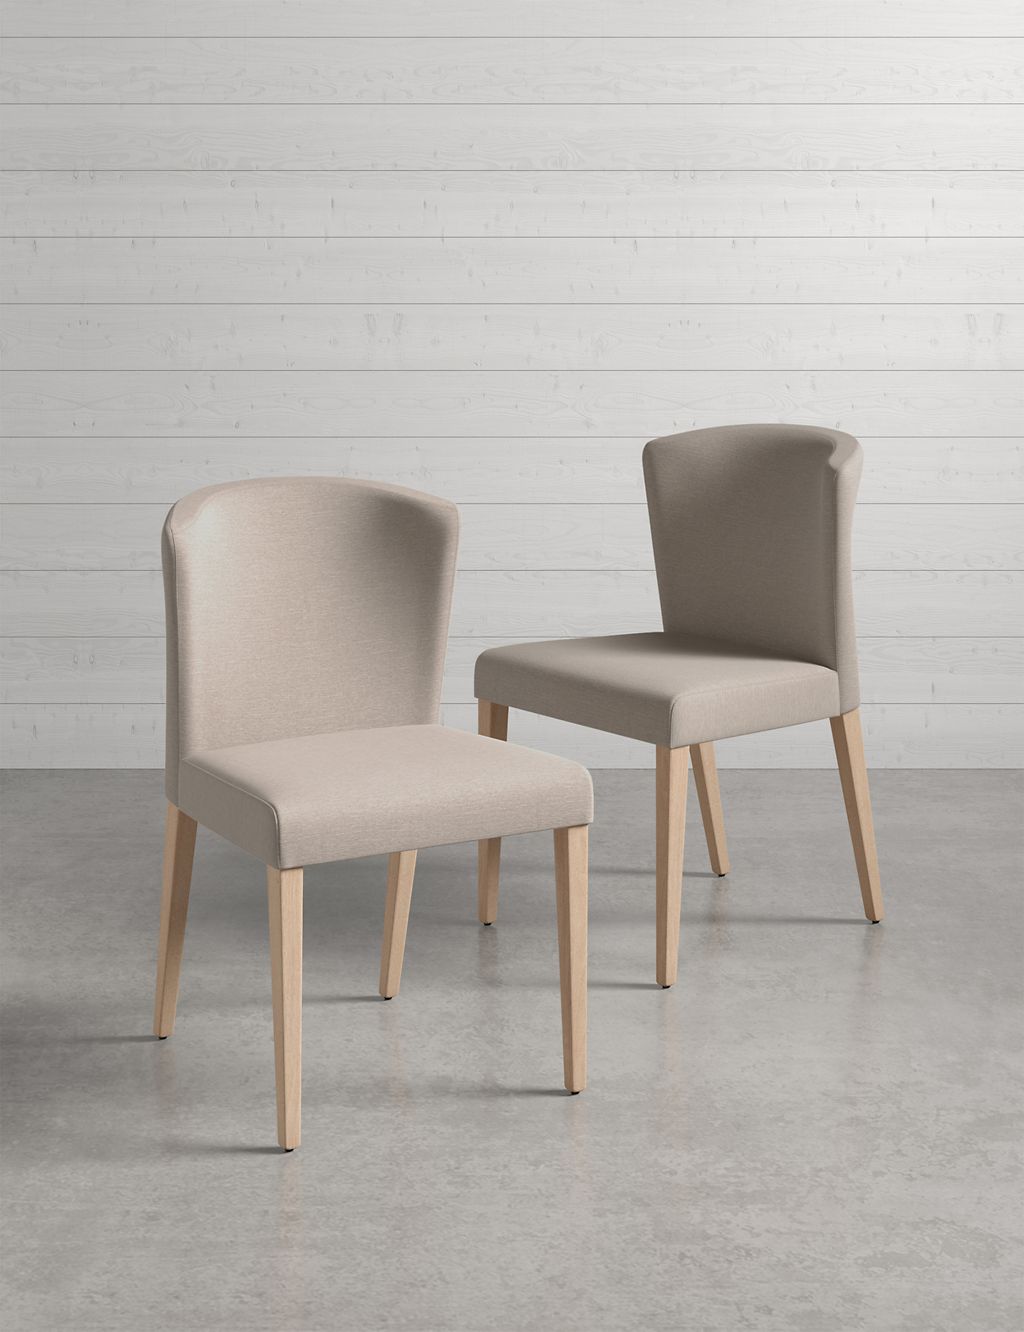 Set of 2 Curved Back Dining Chairs 1 of 8